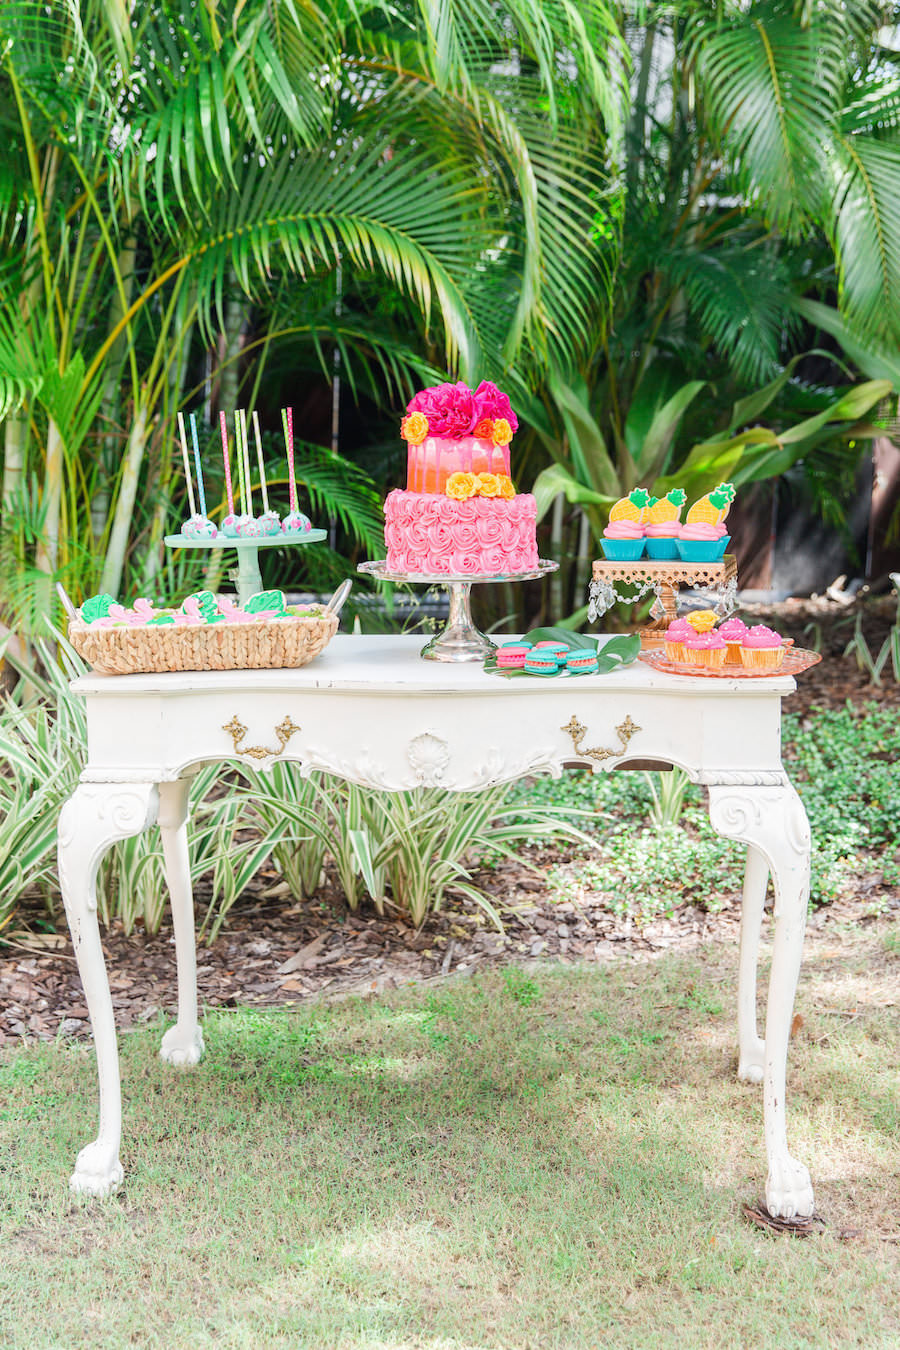 Tropical Lilly Pulitzer Inspired Wedding Dessert Table with Pineapples and Flamingos | Sweetly Dipped Confections Tampa Bay Cake Pops